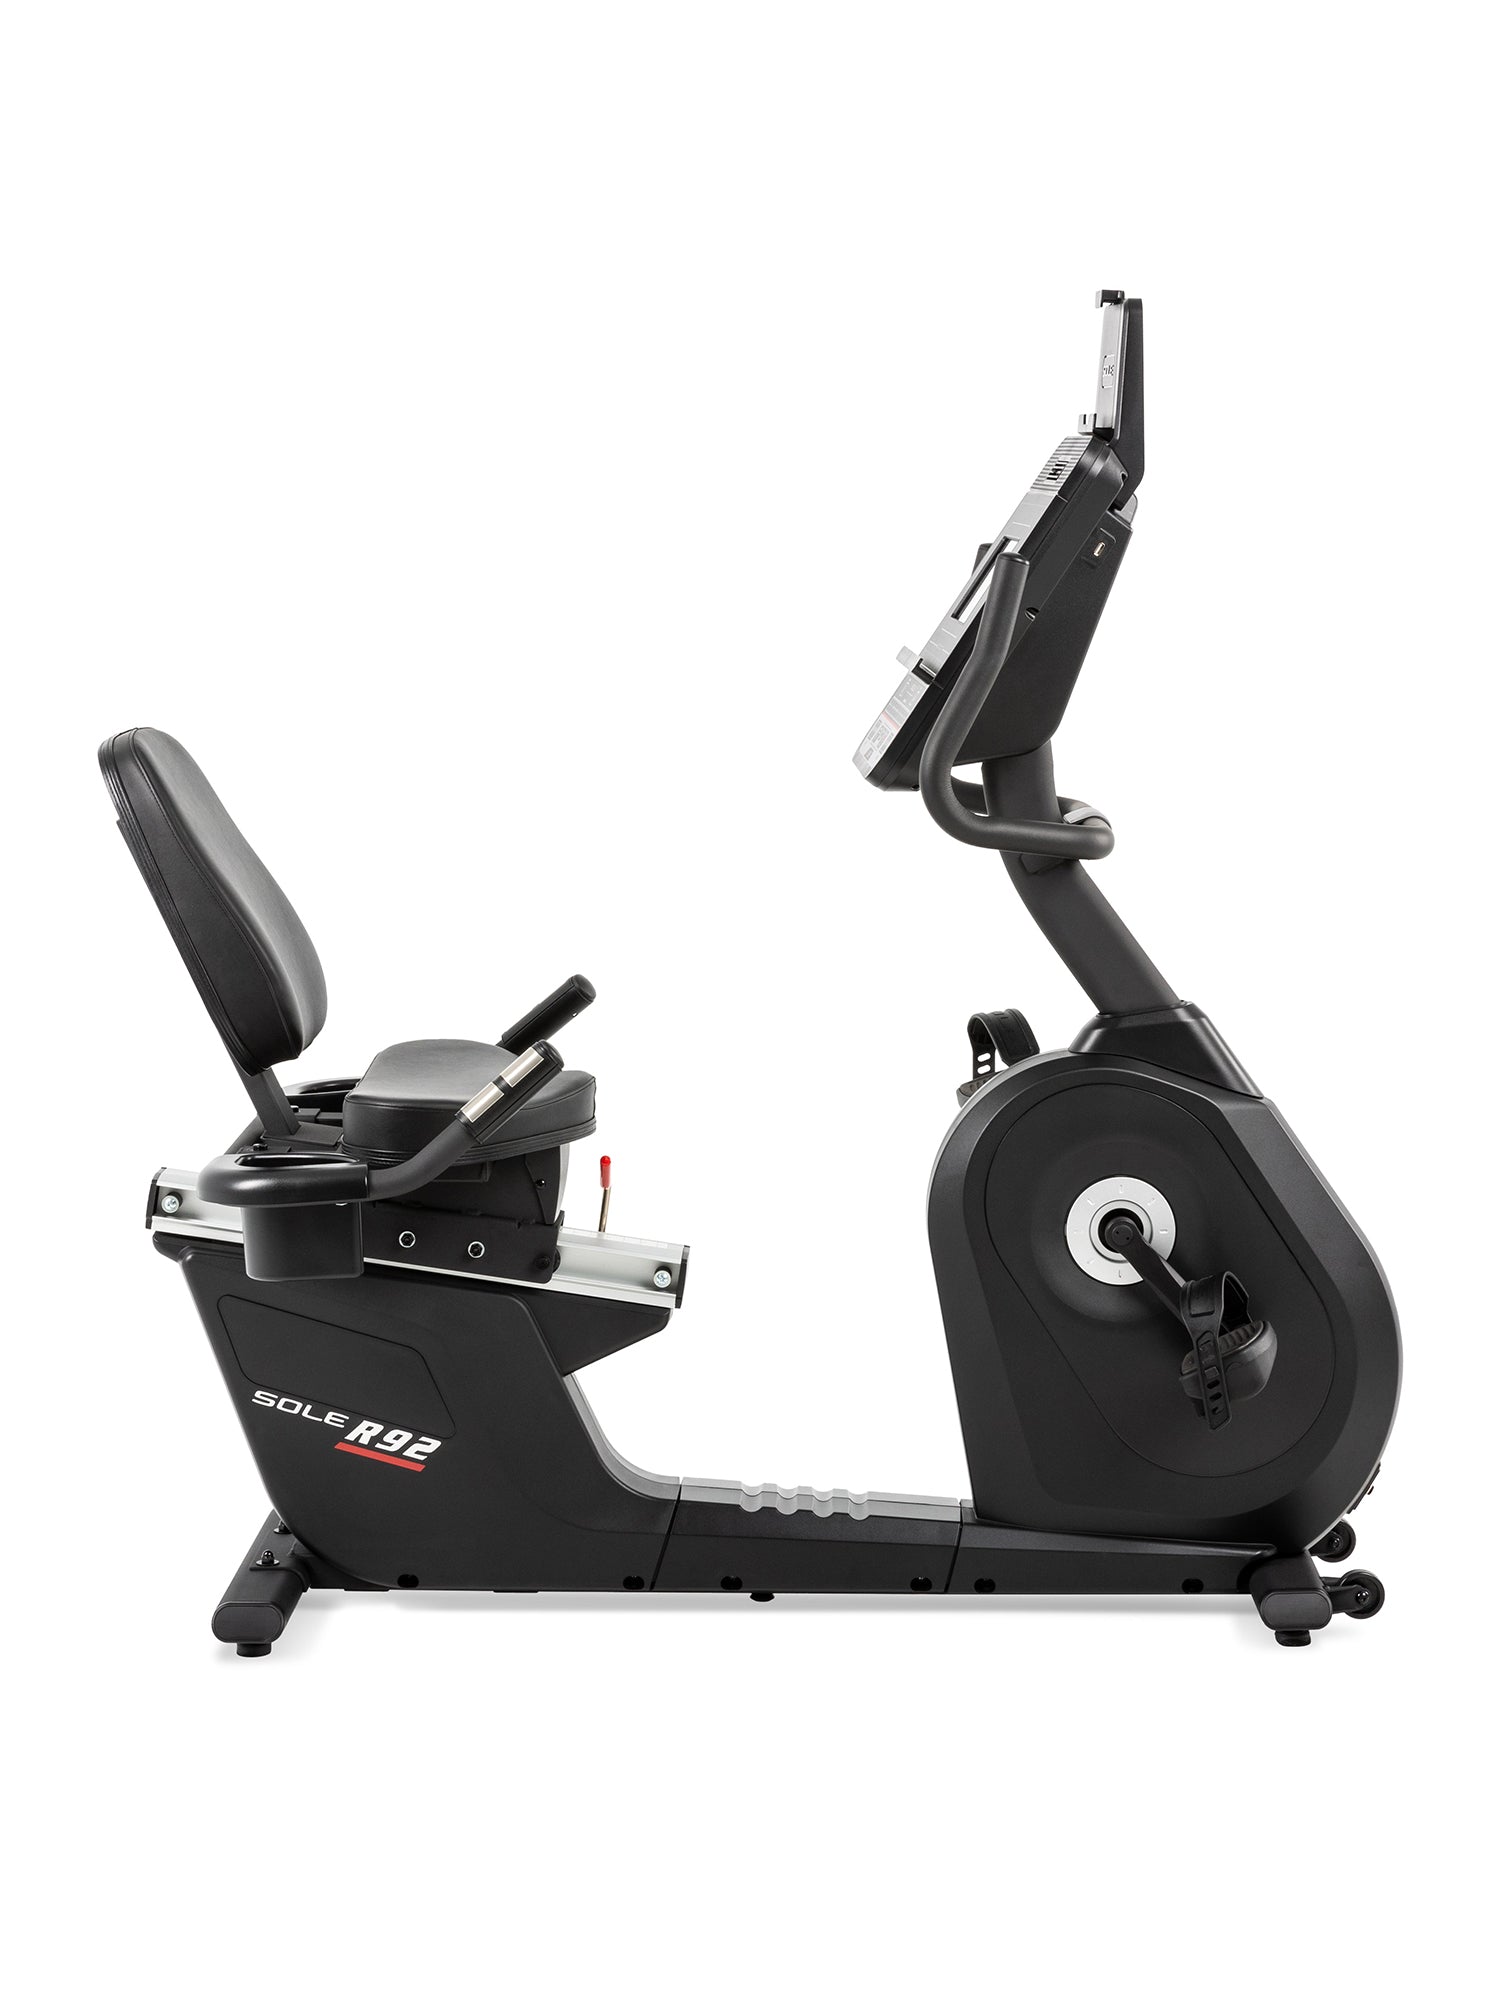 Buy Sole R92 Recumbent Stationary Exercise Bike Online | Sole Fitness